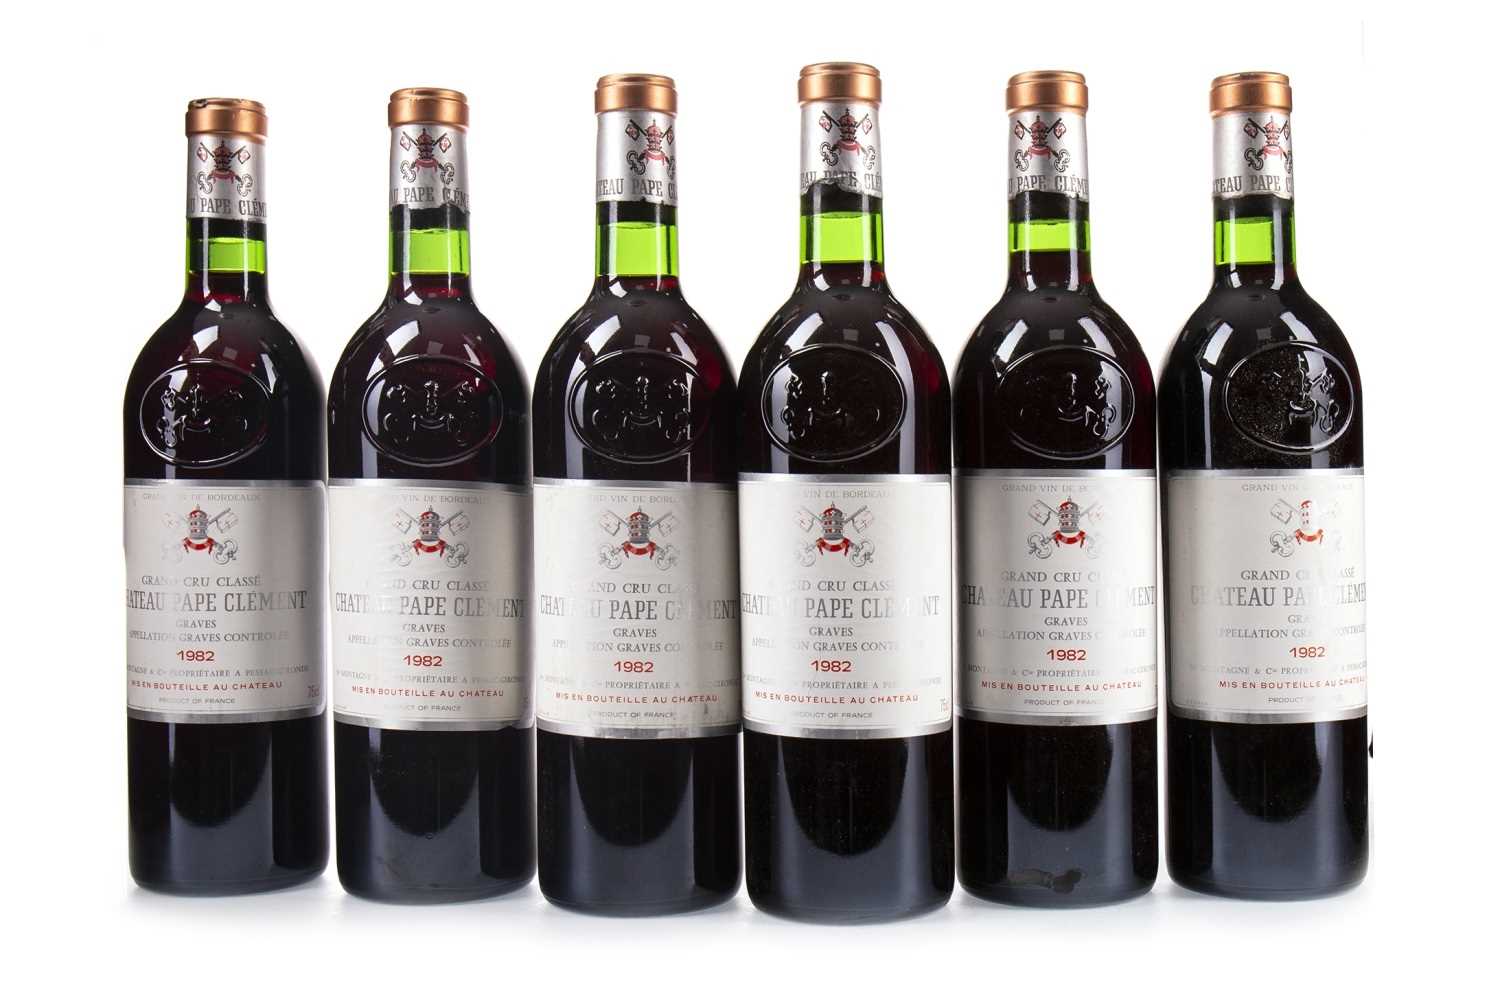 Lot 2043 - ELEVEN BOTTLES OF CHATEAU PAPE CLEMENT 1982